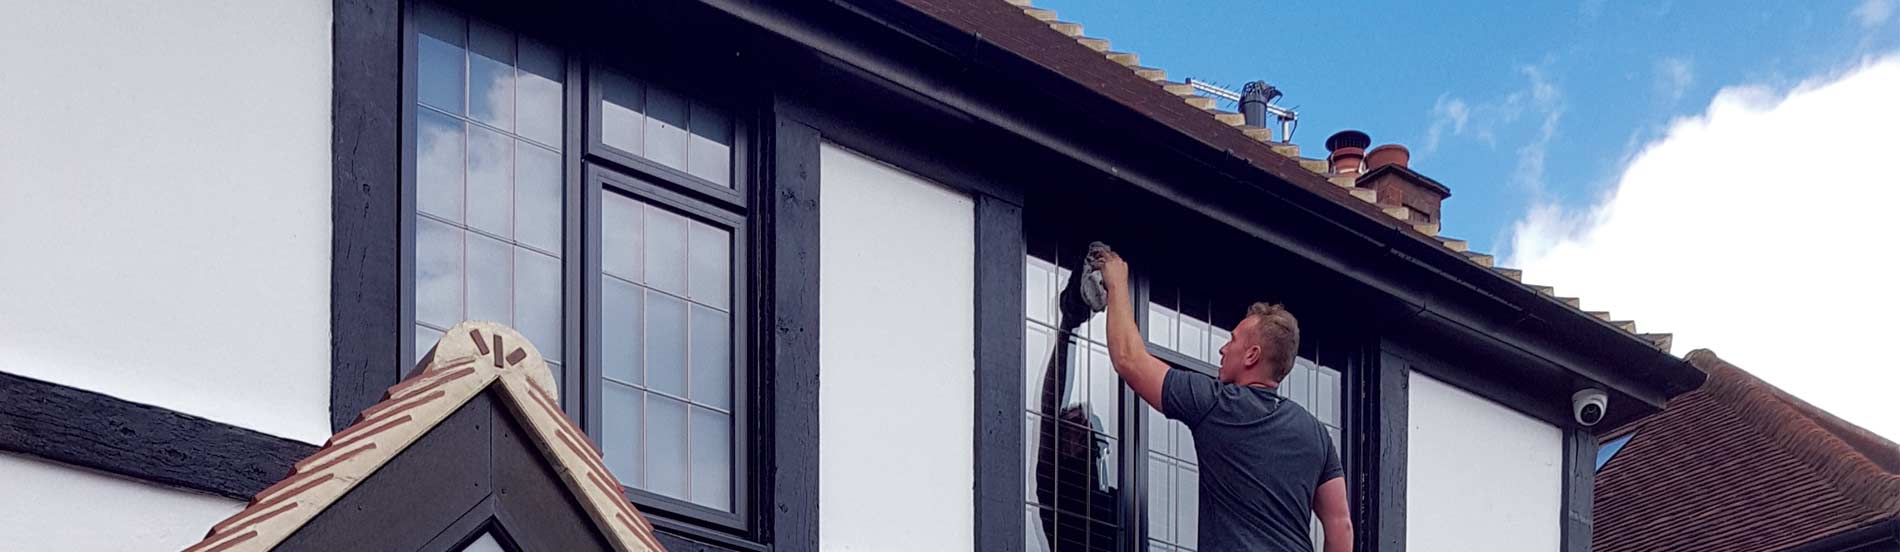 window cleaning services in kent